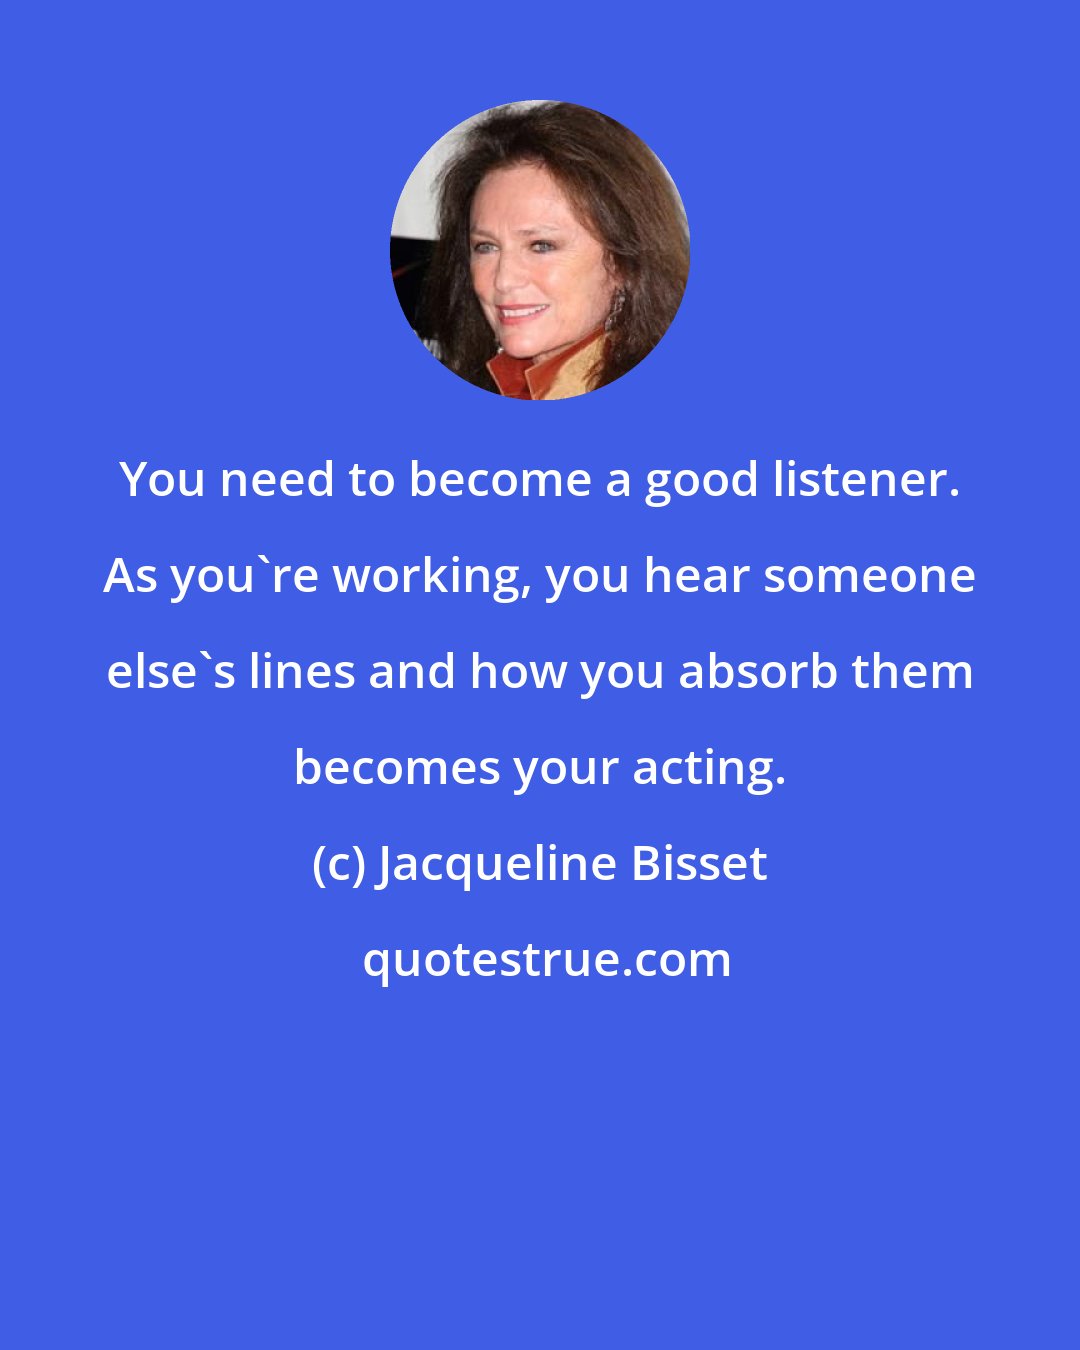 Jacqueline Bisset: You need to become a good listener. As you're working, you hear someone else's lines and how you absorb them becomes your acting.